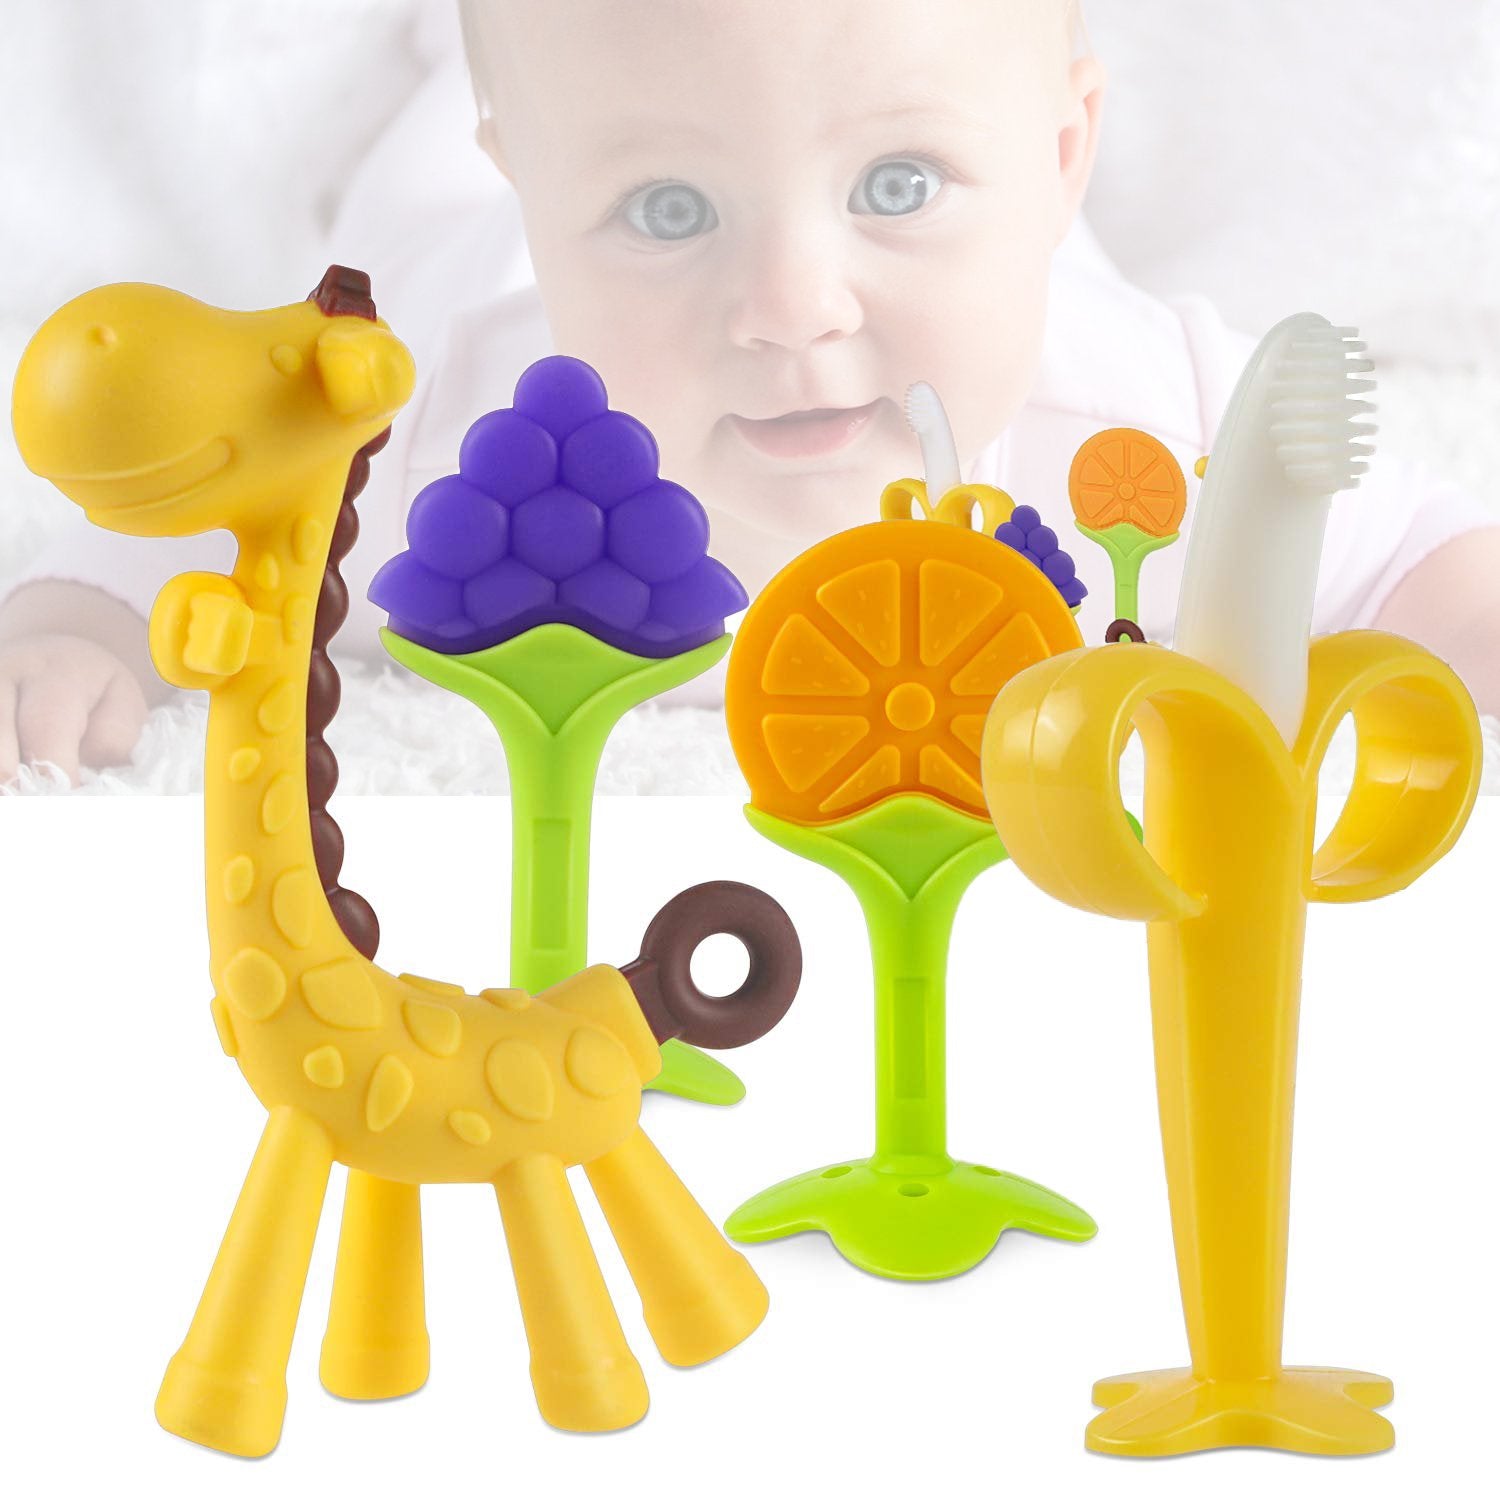 Baby Teething Toys Set/Baby teether chew Toys/Natural Organic Freezer Safe for Infants and Toddlers/BPA-Free Teether Set for Boys & Girls